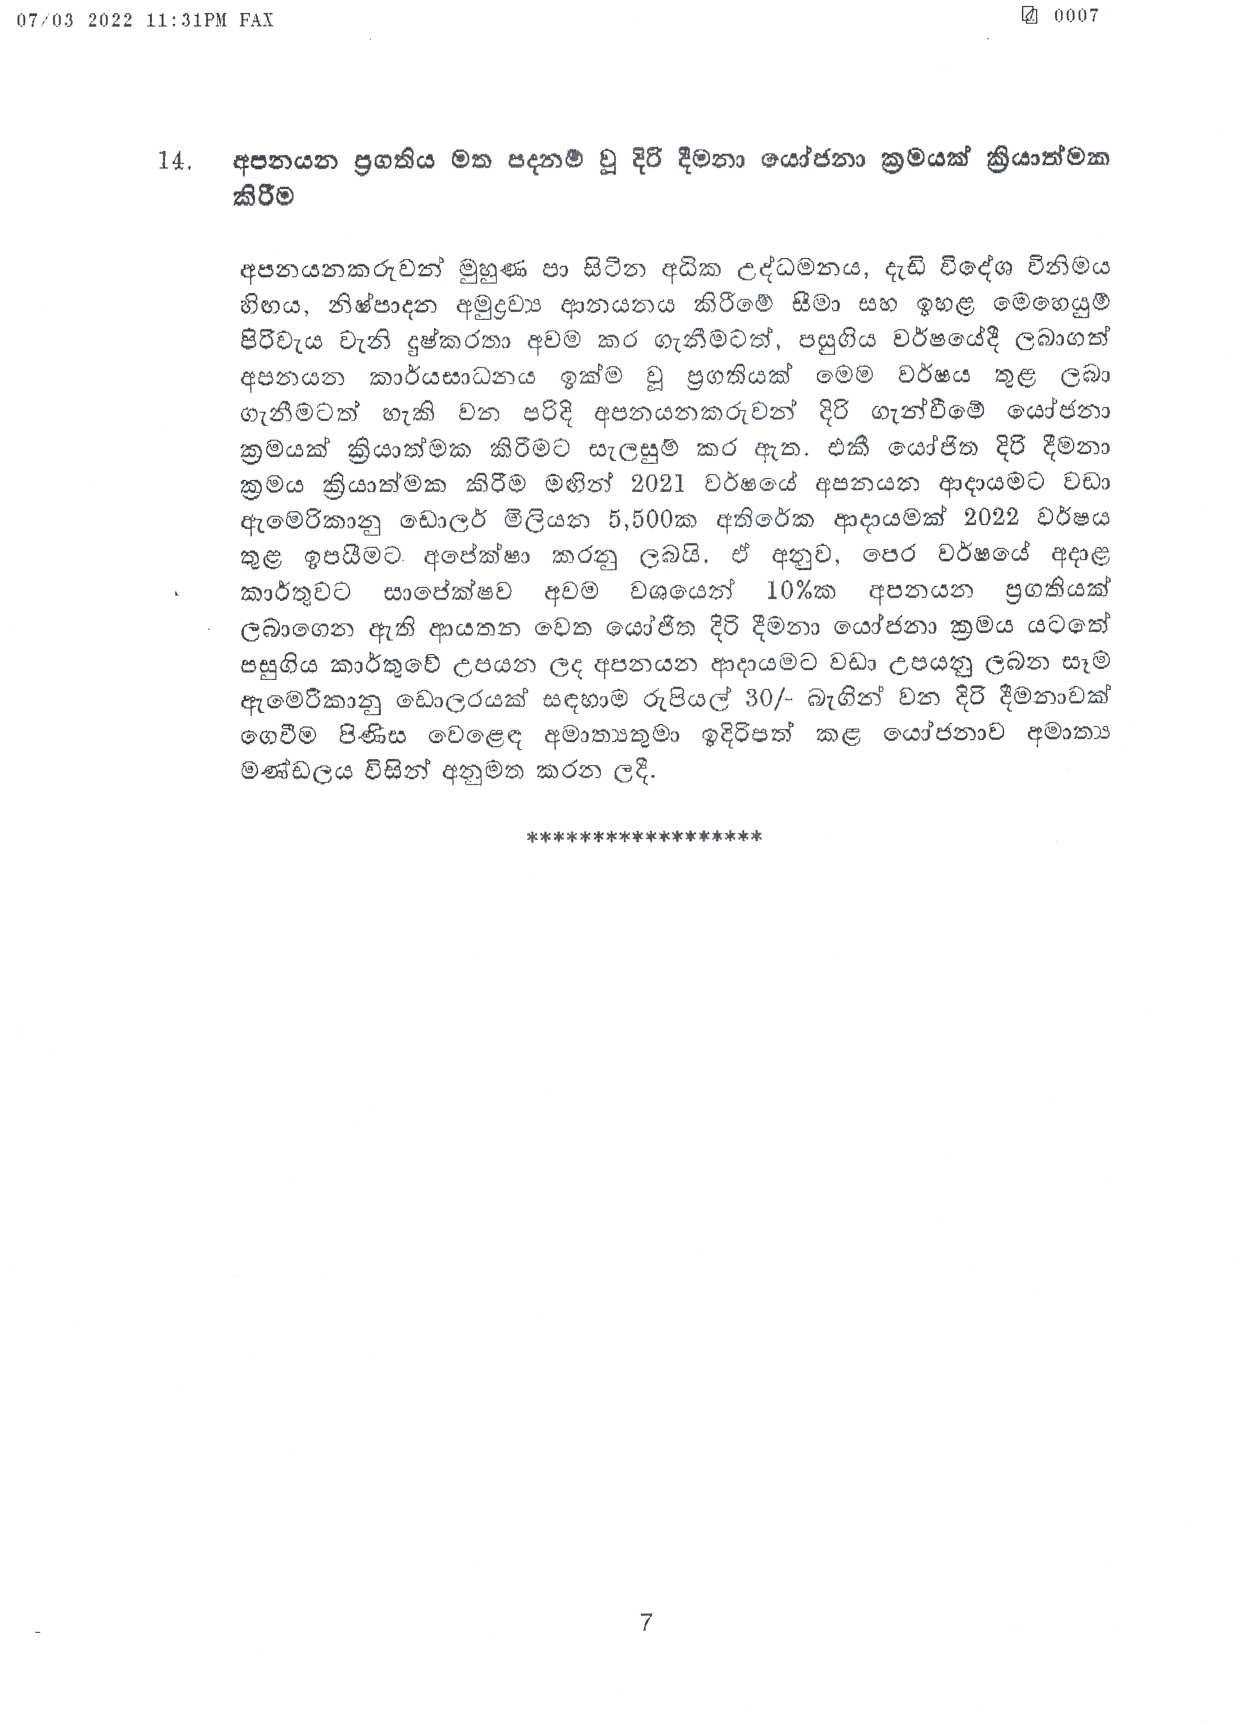 Cabinet Decision on 07.03.2022 page 007